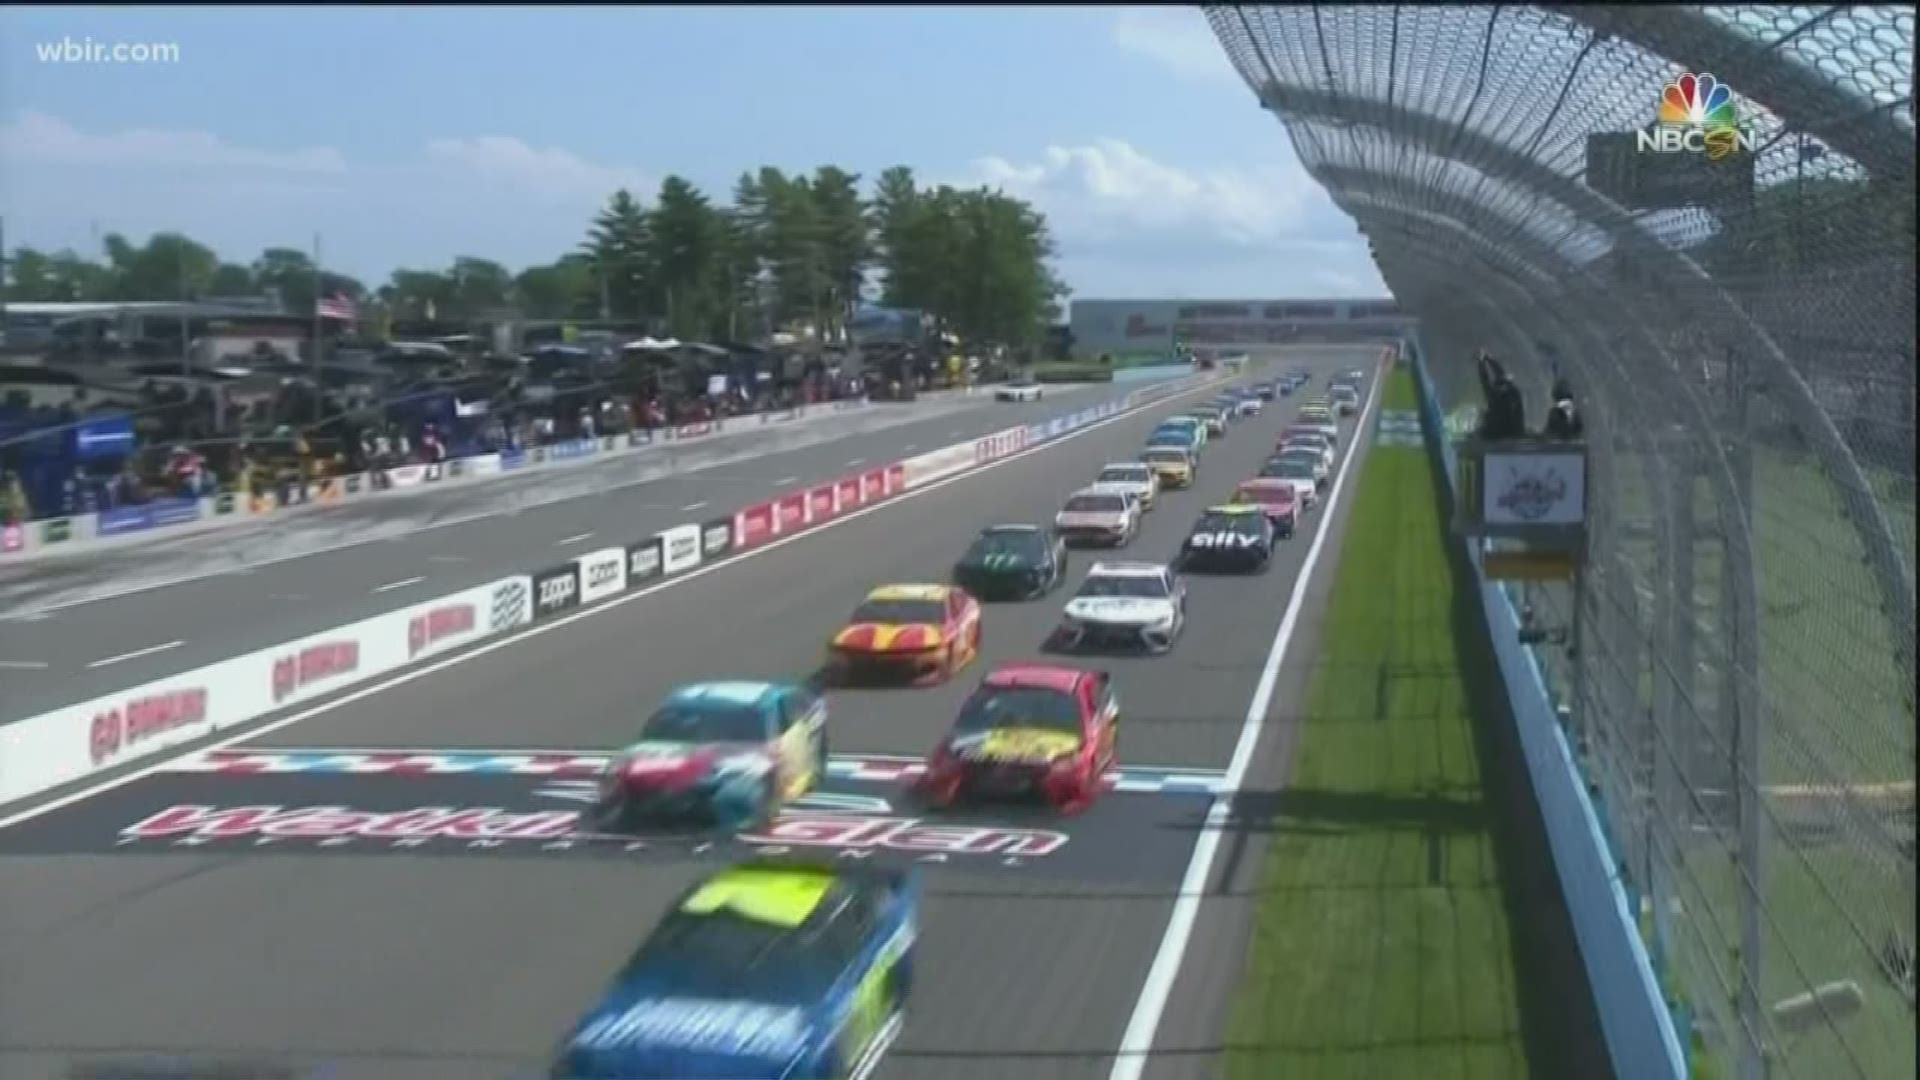 One expert said drivers often say the riskiest part of race day is getting to and from the track.